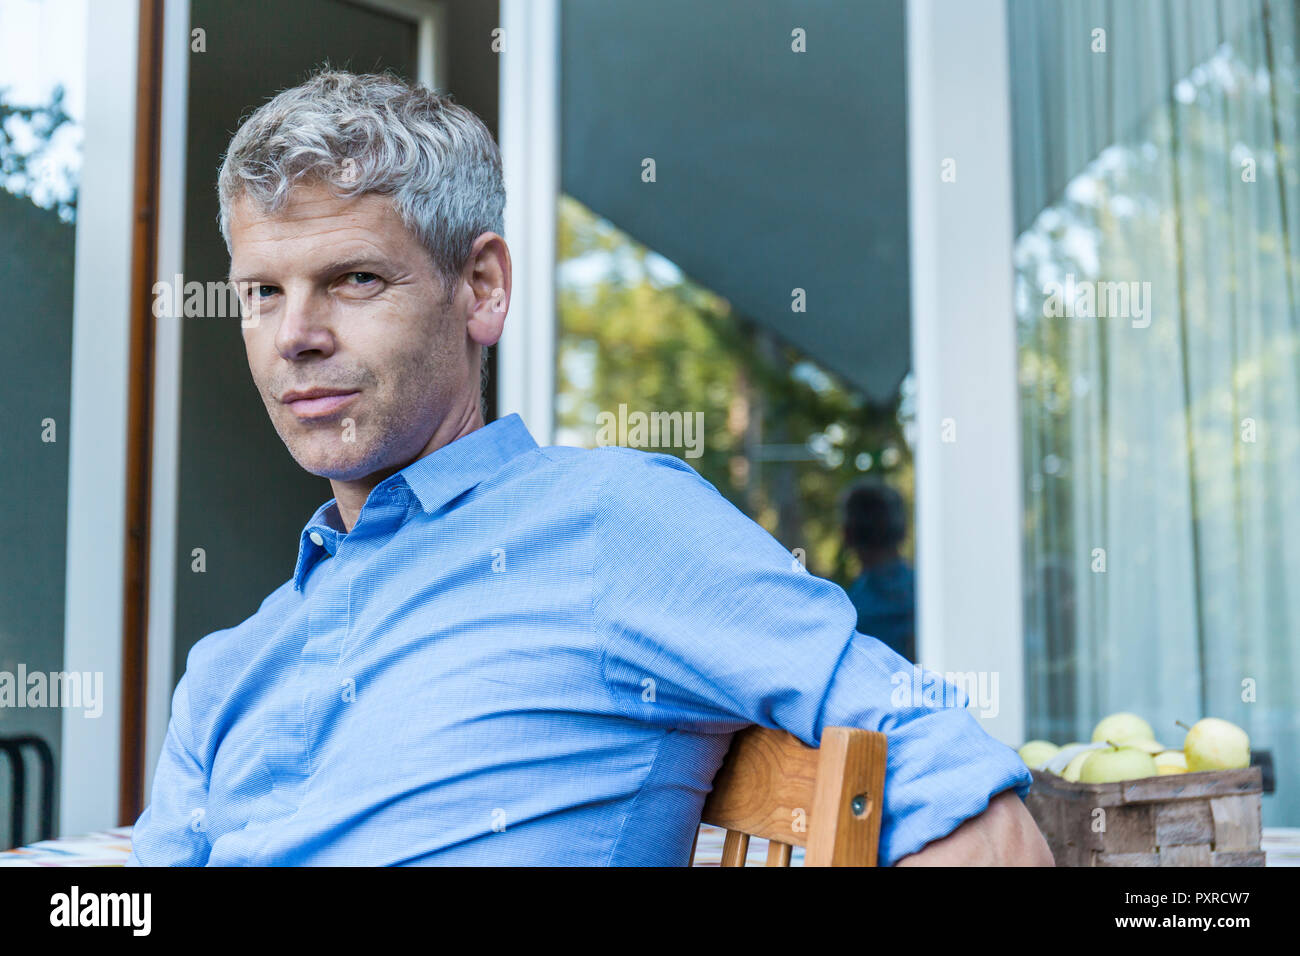 Portrait of mature man with grey hair sitting on terrace wearing blue shirt Stock Photo